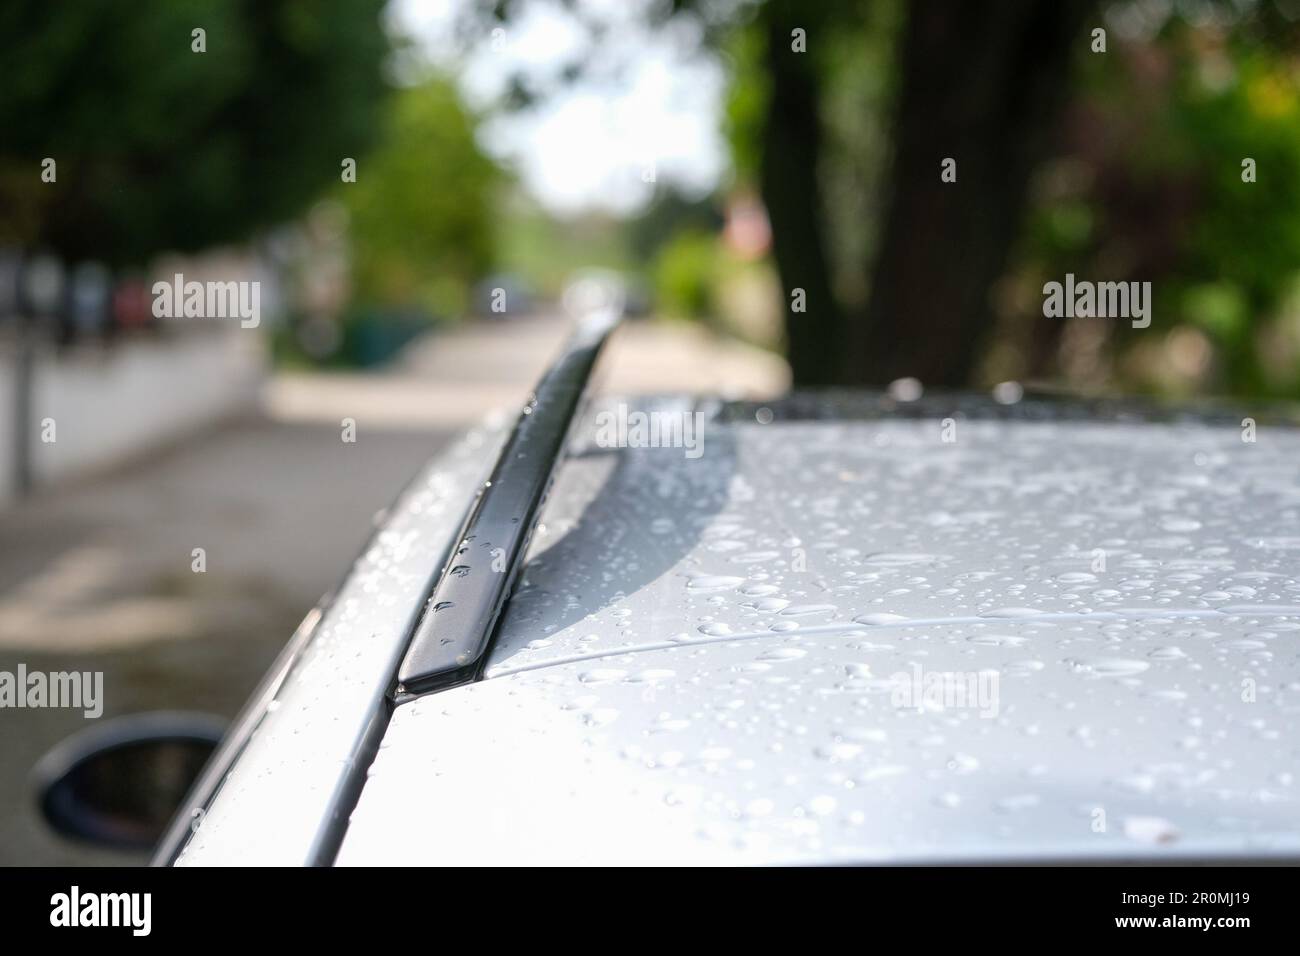 Close up roof luggage rack well above car with isolated tree and street background. Wet surface above car. Selective focus. Stock Photo